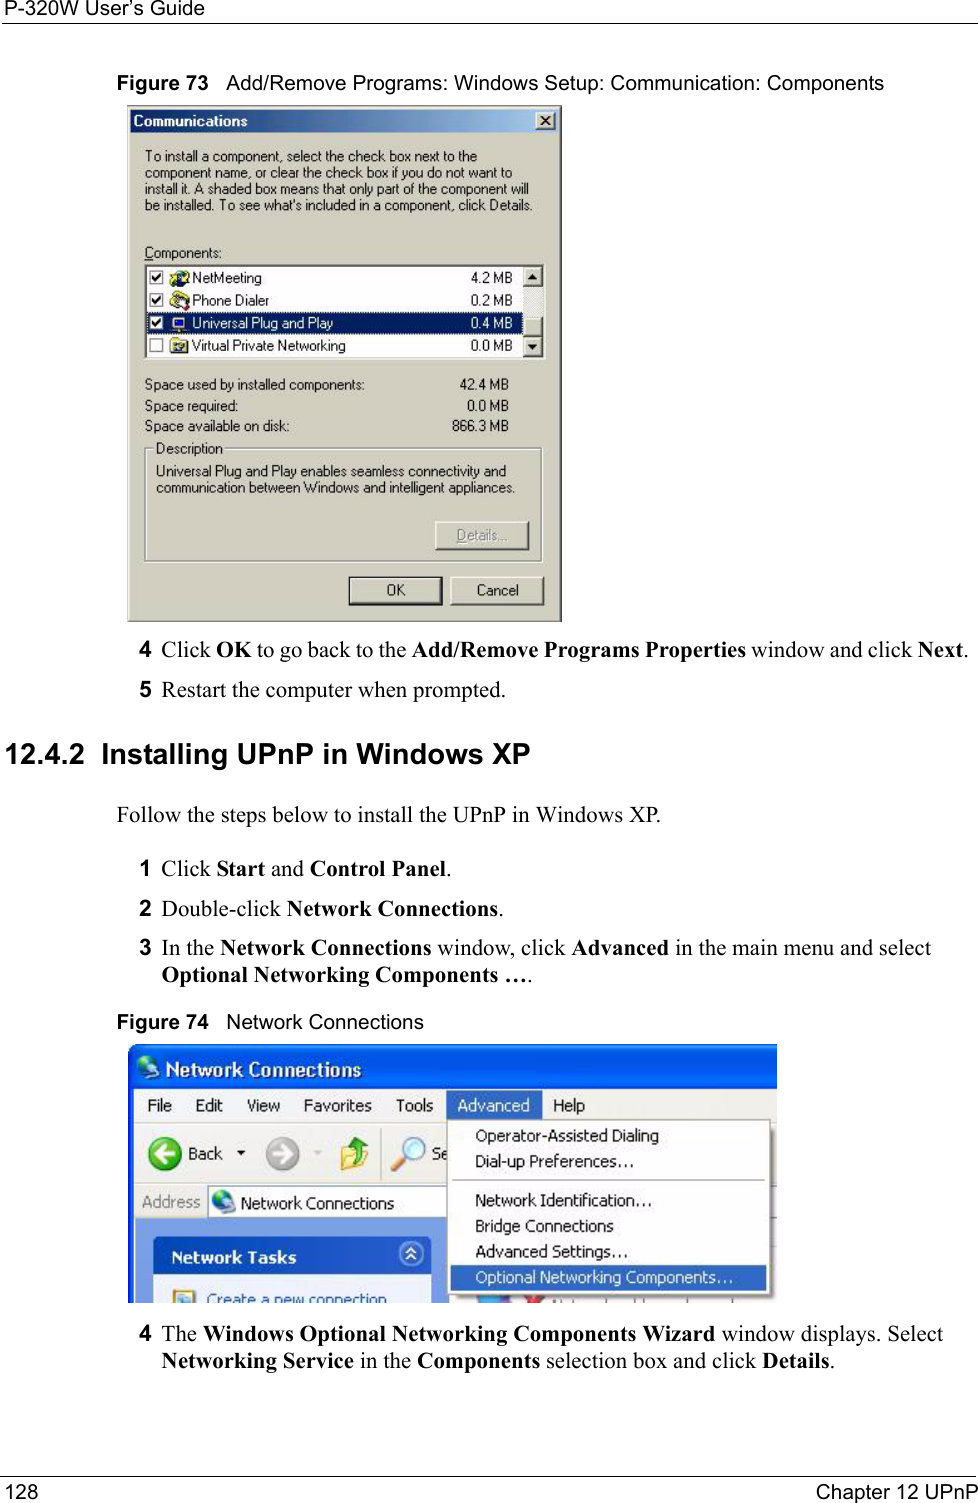 P-320W User’s Guide128  Chapter 12 UPnPFigure 73   Add/Remove Programs: Windows Setup: Communication: Components4Click OK to go back to the Add/Remove Programs Properties window and click Next.  5Restart the computer when prompted. 12.4.2  Installing UPnP in Windows XPFollow the steps below to install the UPnP in Windows XP.1Click Start and Control Panel. 2Double-click Network Connections.3In the Network Connections window, click Advanced in the main menu and select Optional Networking Components ….  Figure 74   Network Connections4The Windows Optional Networking Components Wizard window displays. Select Networking Service in the Components selection box and click Details. 